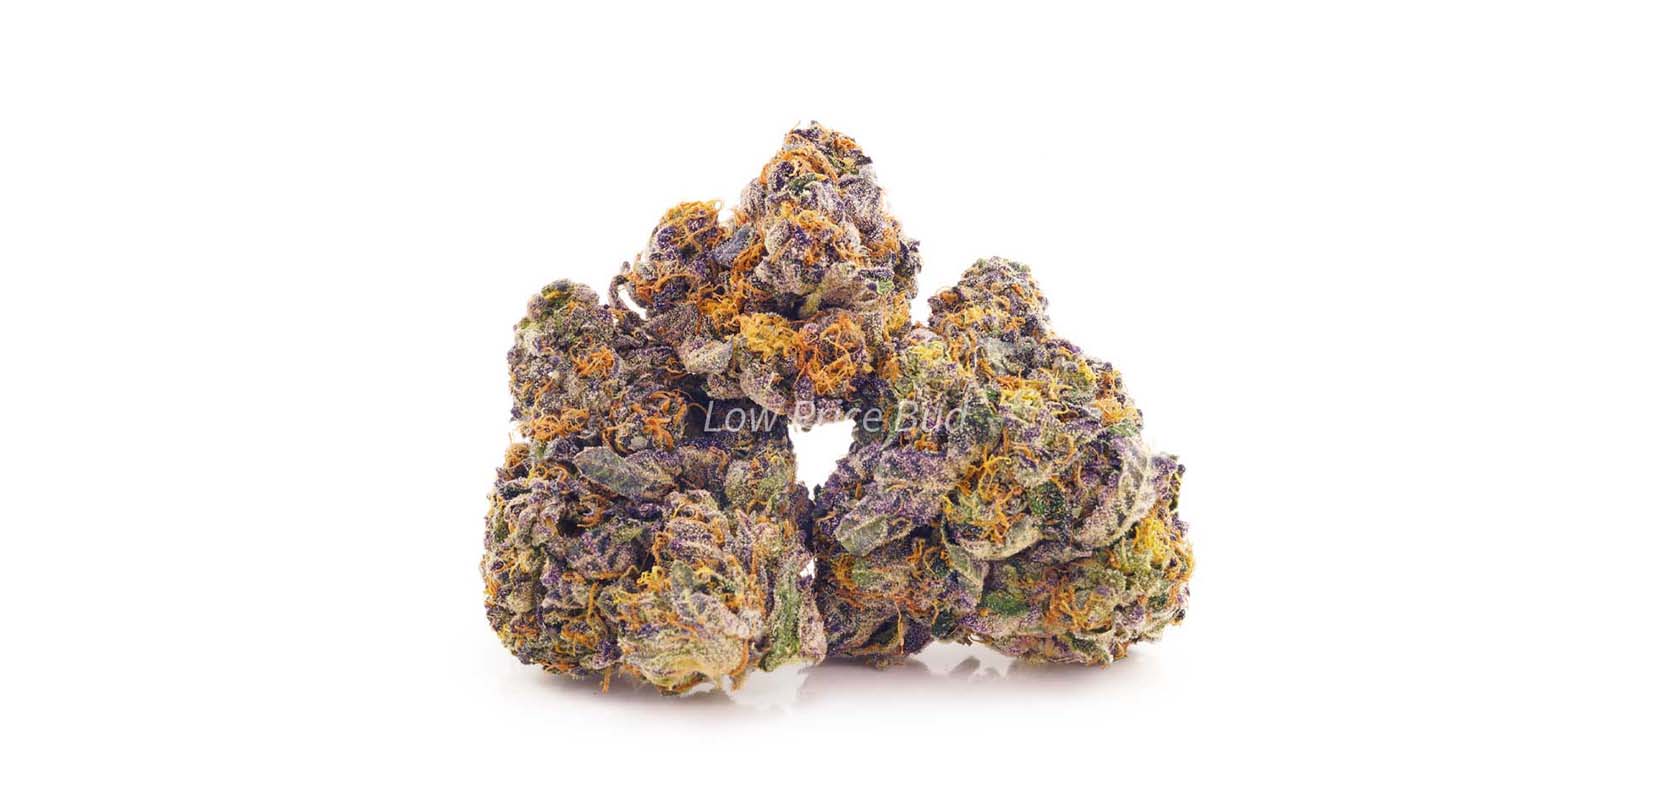 potent weed online canada from weed dispensary for mail order marijuana. strongest hybrid strains. ontario marijuana. edibles canada. pot shop to buy weed online. Dispencary.